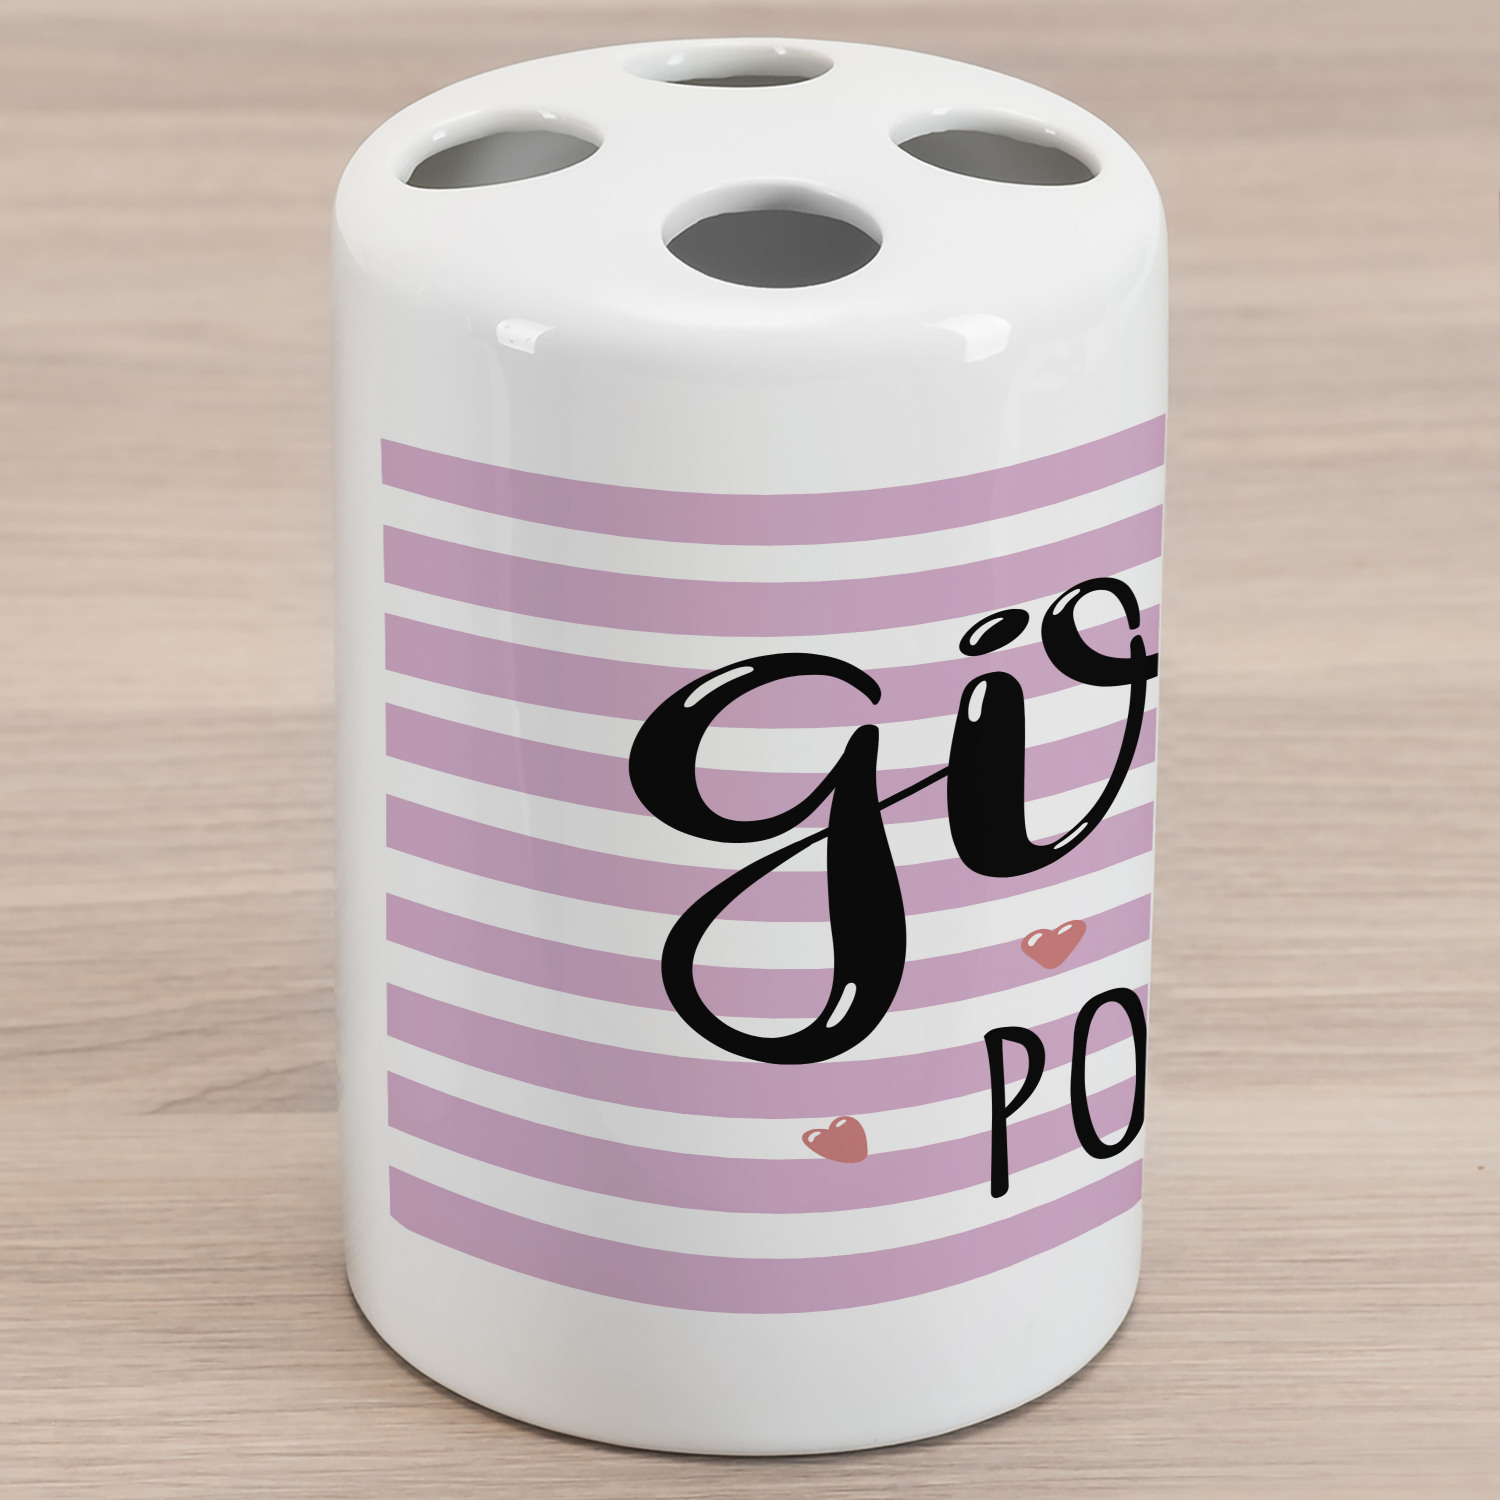 Lettering Ceramic Toothbrush Holder, Girl Power Striped Hearts Teen Motivation Feminism Strong Words, Decorative Versatile Countertop for Bathroom, 4.5" X 2.7", Pale Pink Charcoal Grey - image 1 of 4